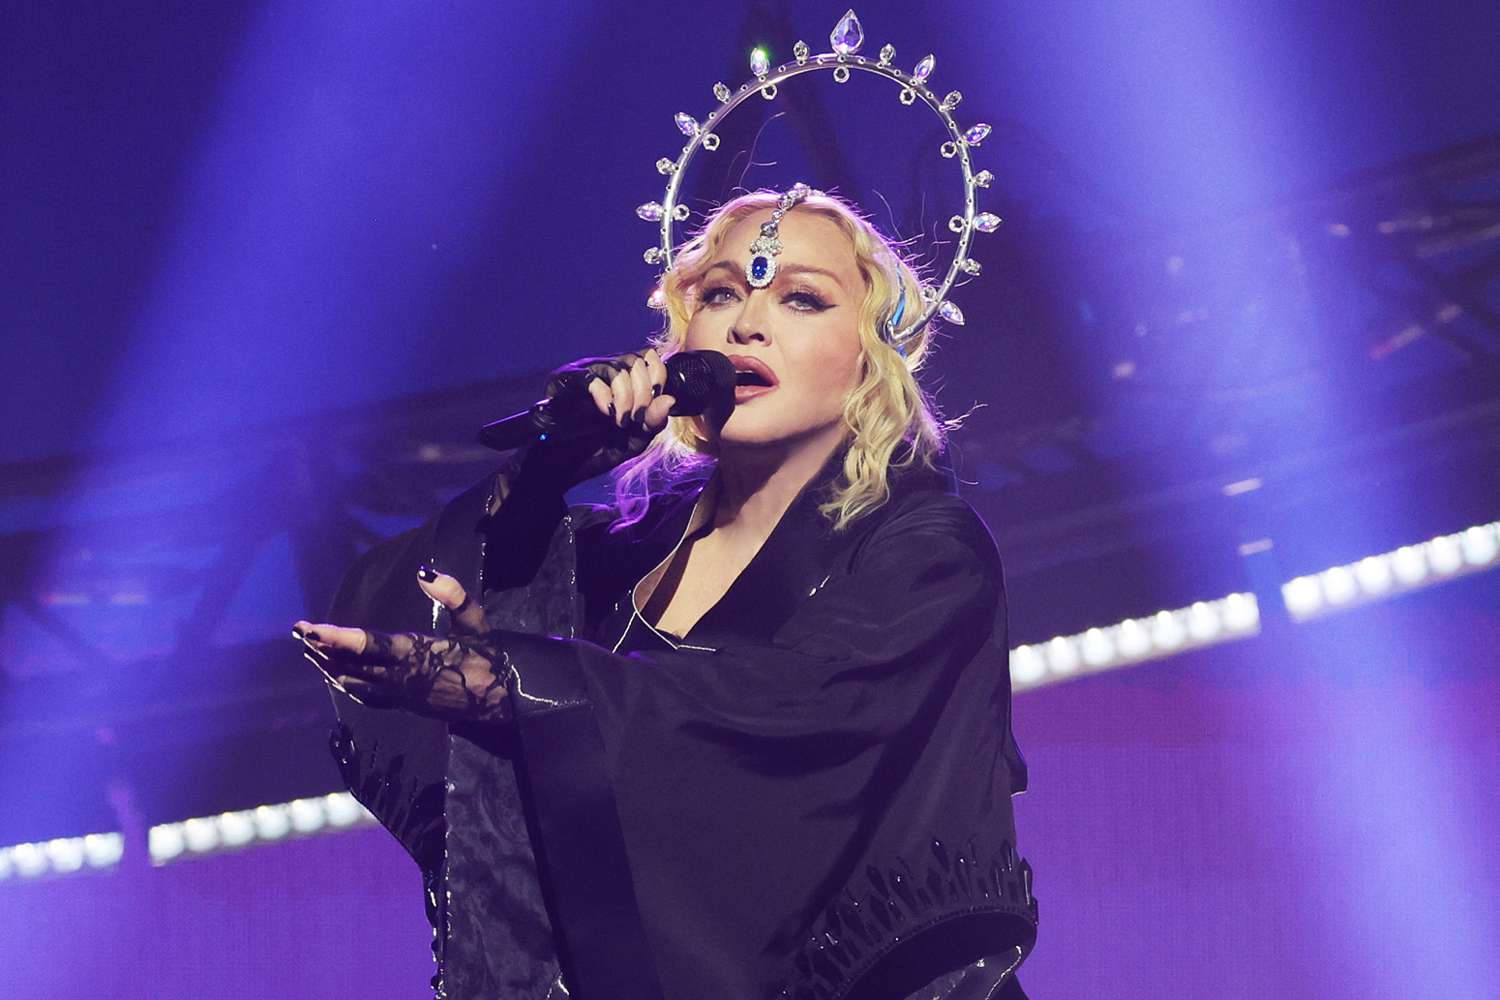 An embarrassing mistake by Madonna at a concert in Los Angeles